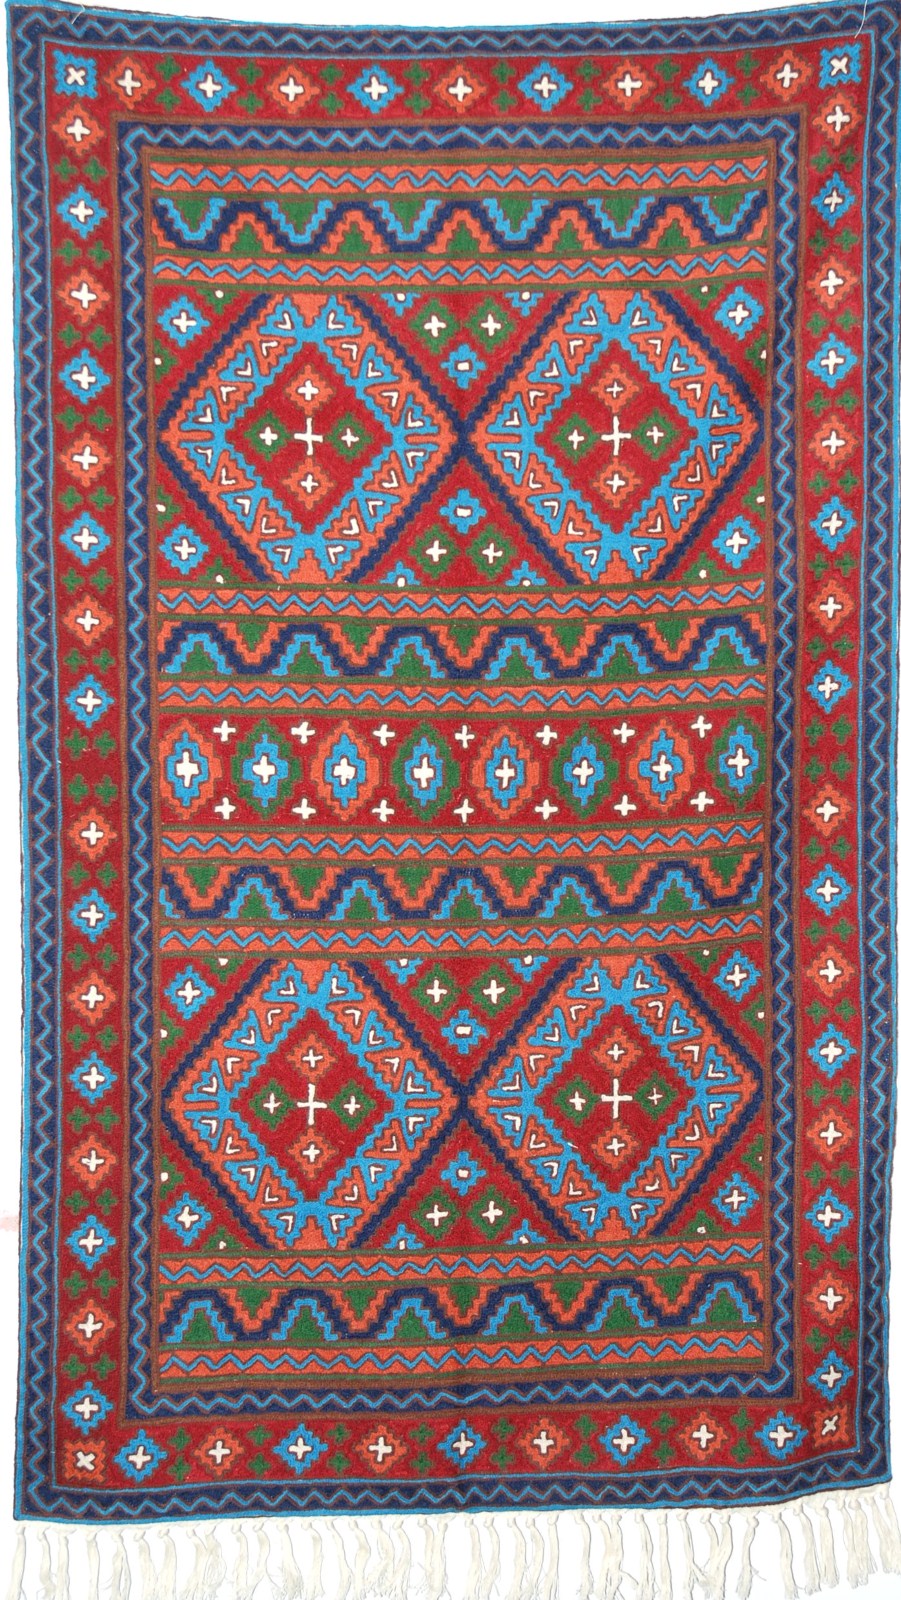 ChainStitch Tapestry Area Rug Kelim, Multicolor Wool Embroidery 3x5 feet #CWR15128